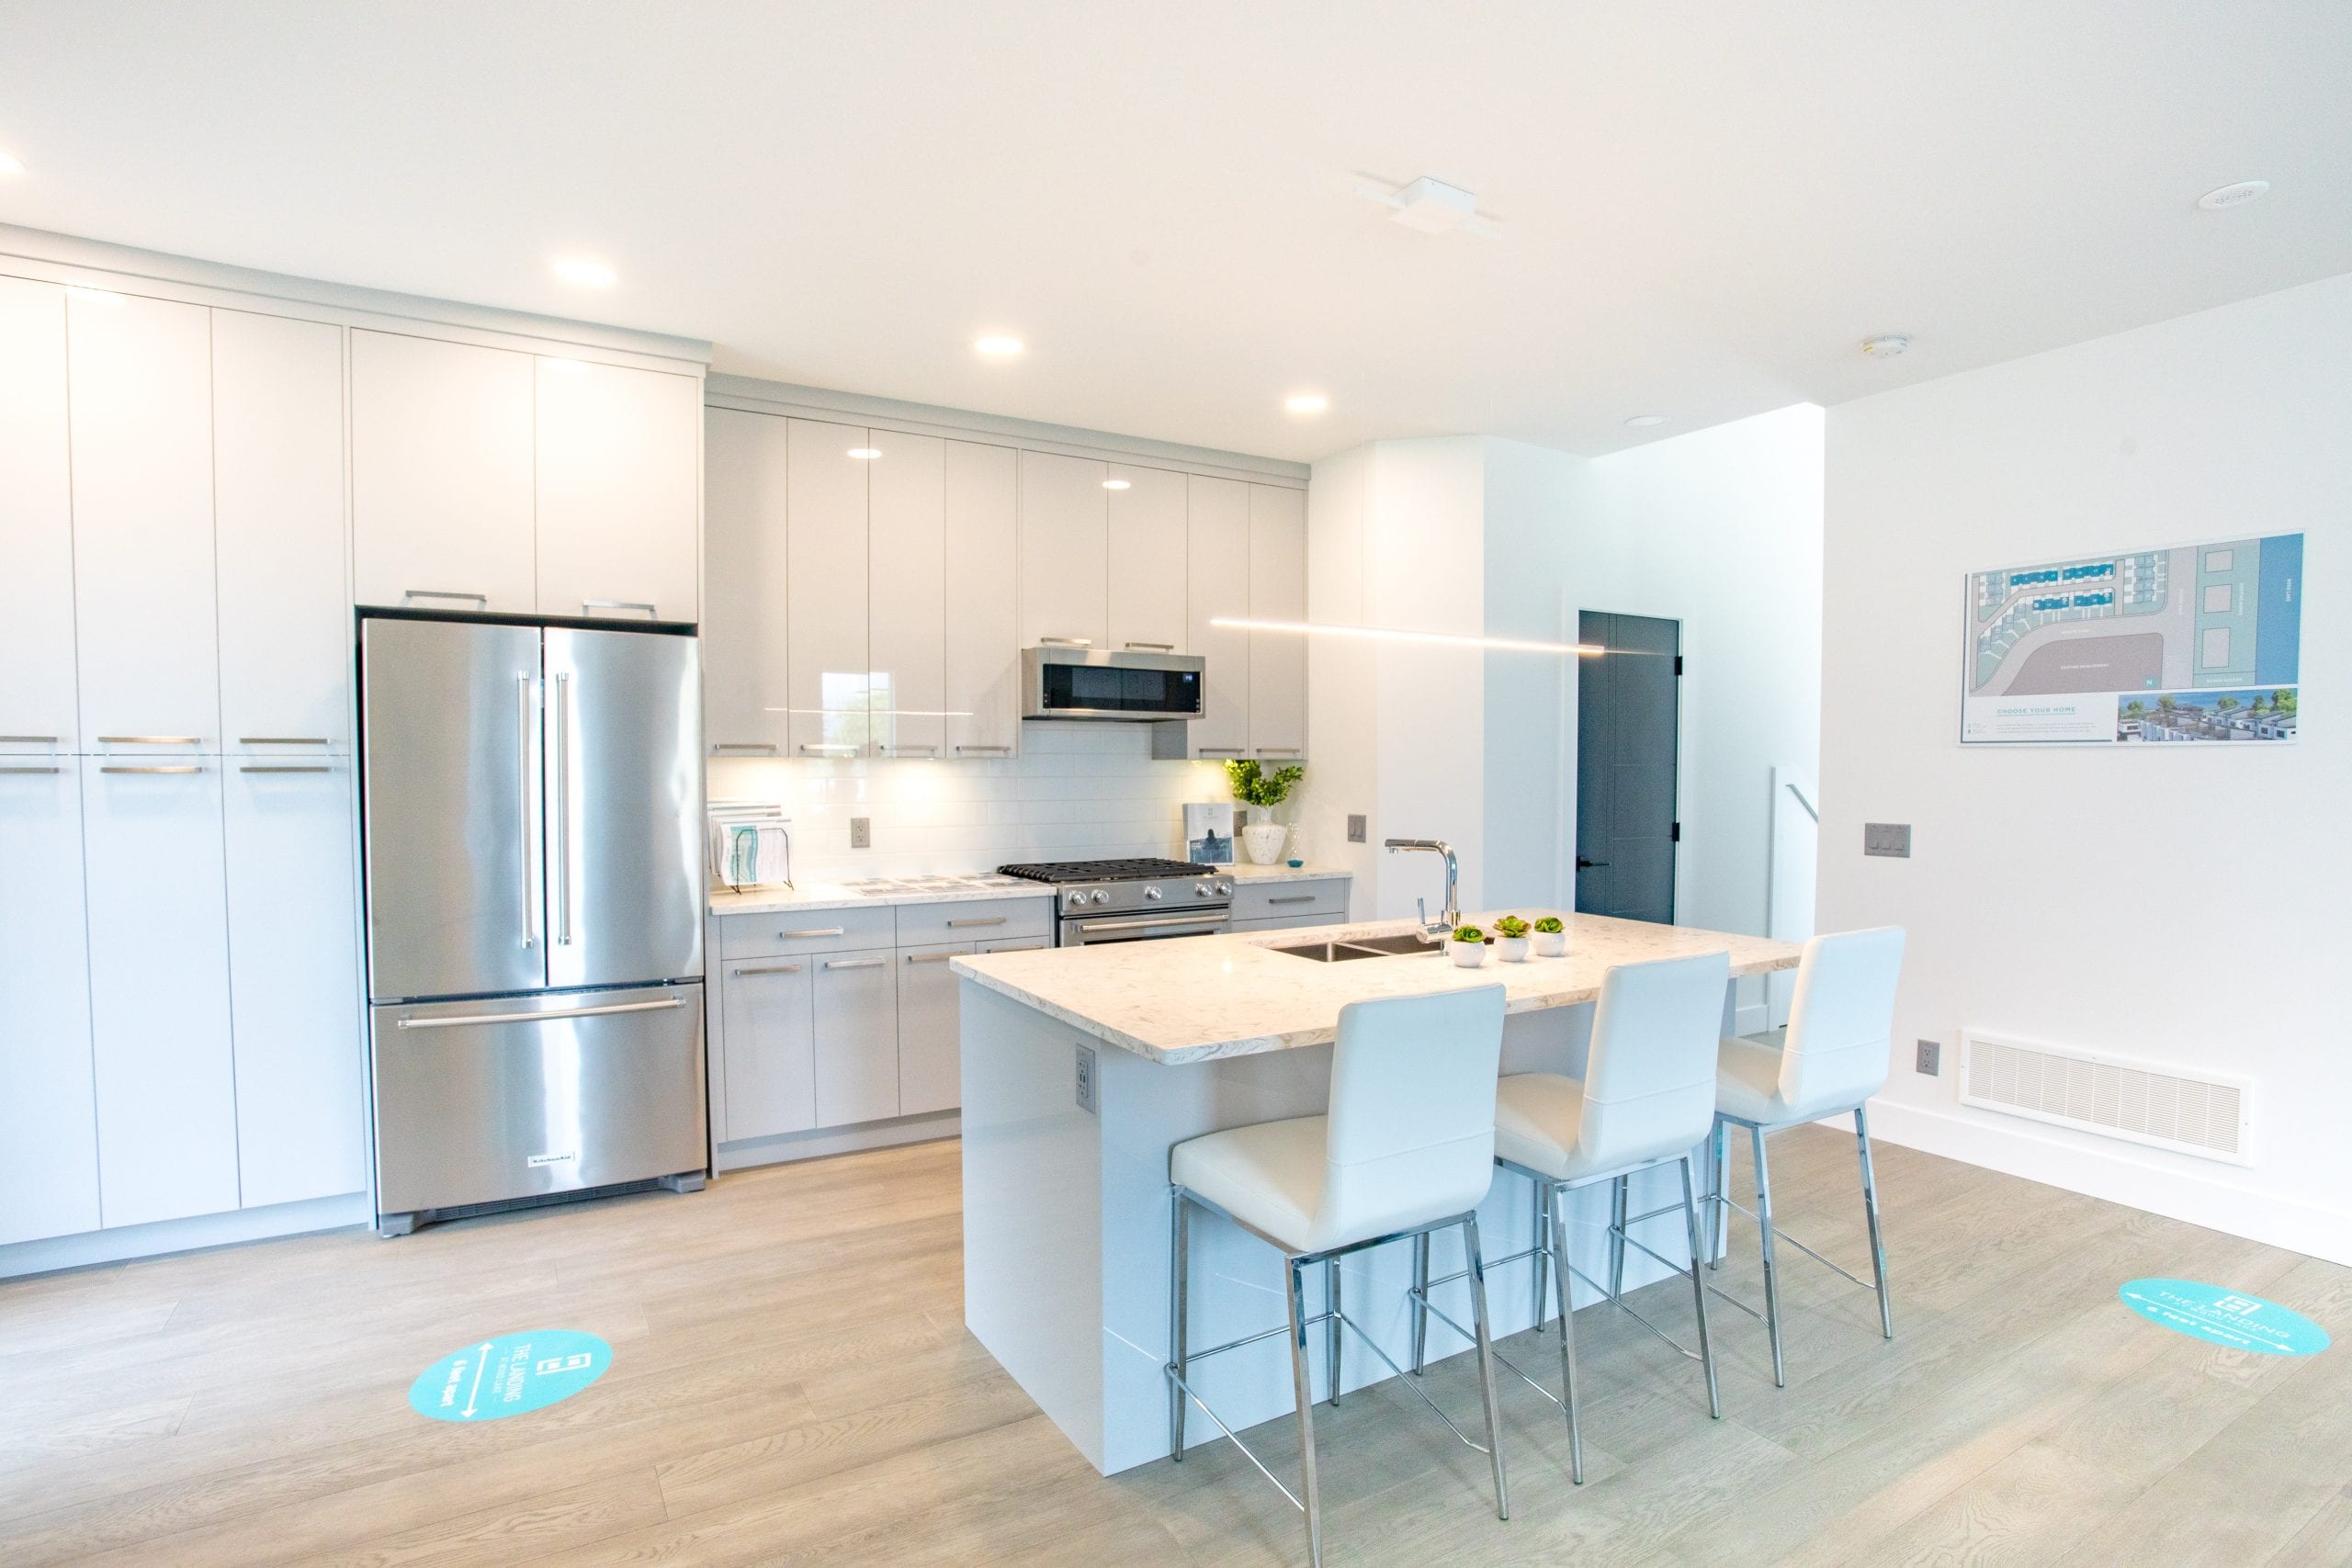 Sleek kitchen design with quartz, stainless KitchenAid appliances, high gloss cabinetry and hardwood floors.